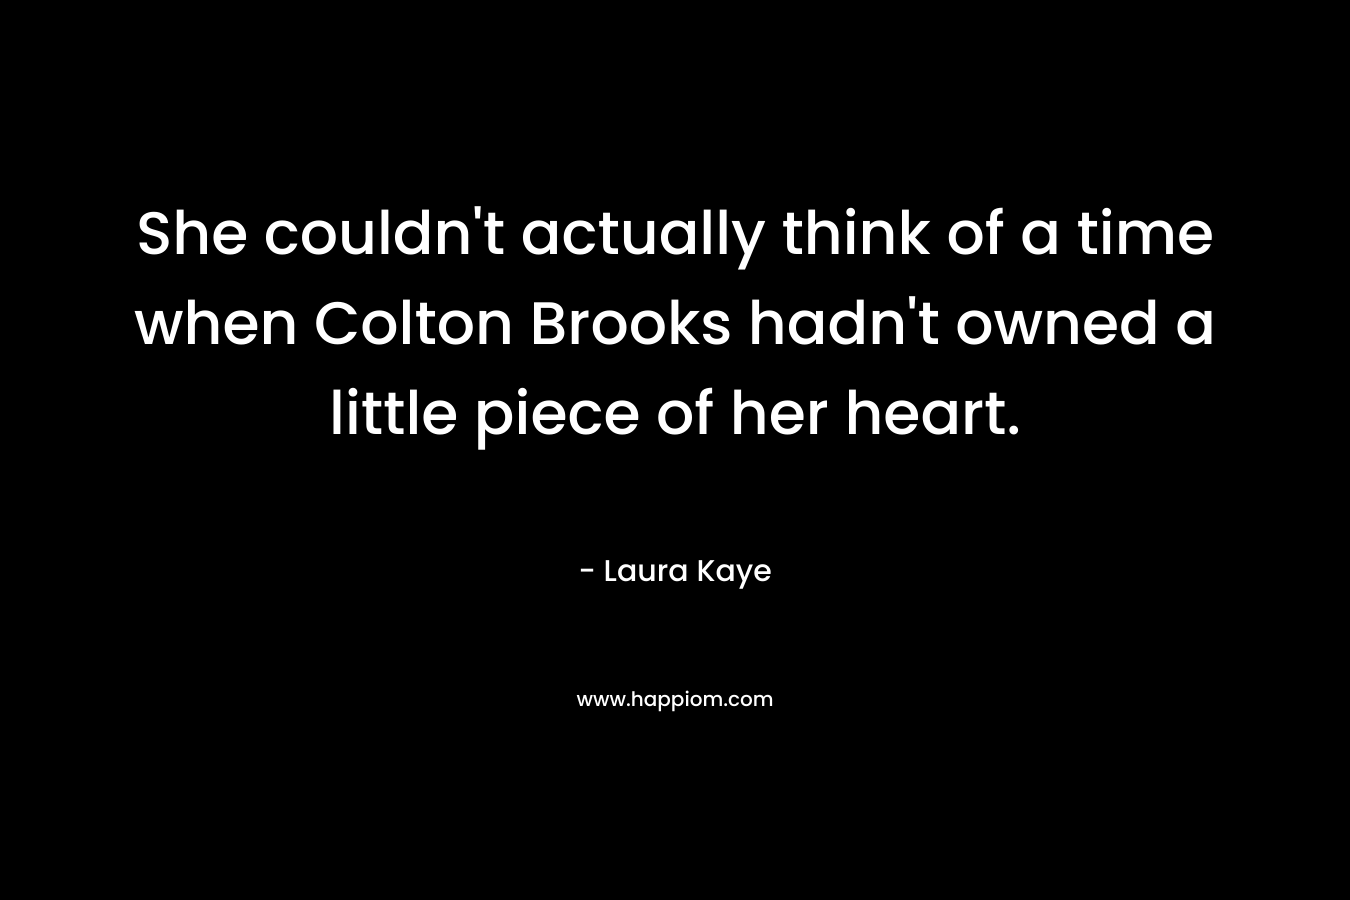 She couldn't actually think of a time when Colton Brooks hadn't owned a little piece of her heart.